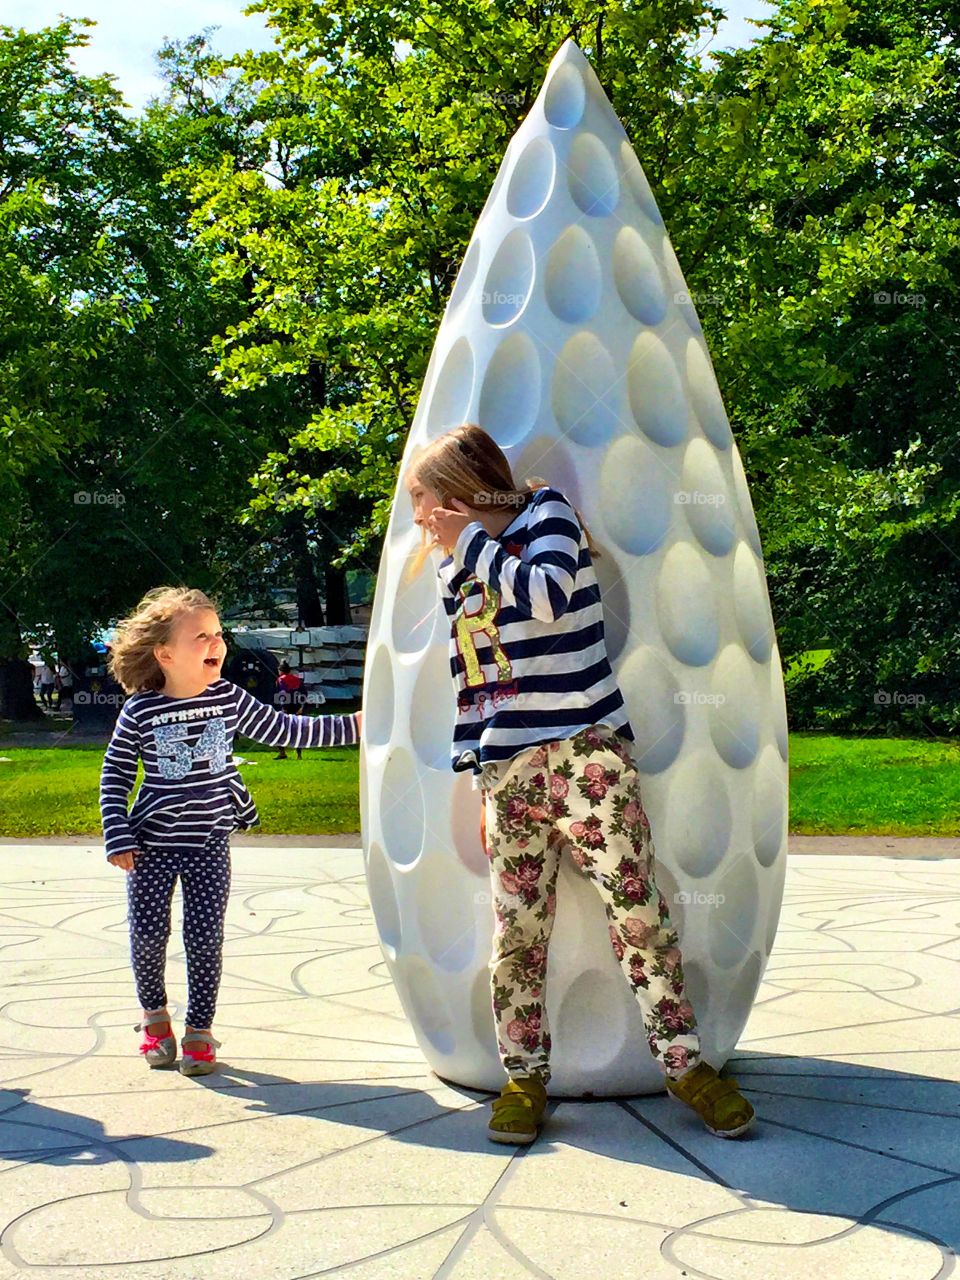 Children playing near the white sculpture in park